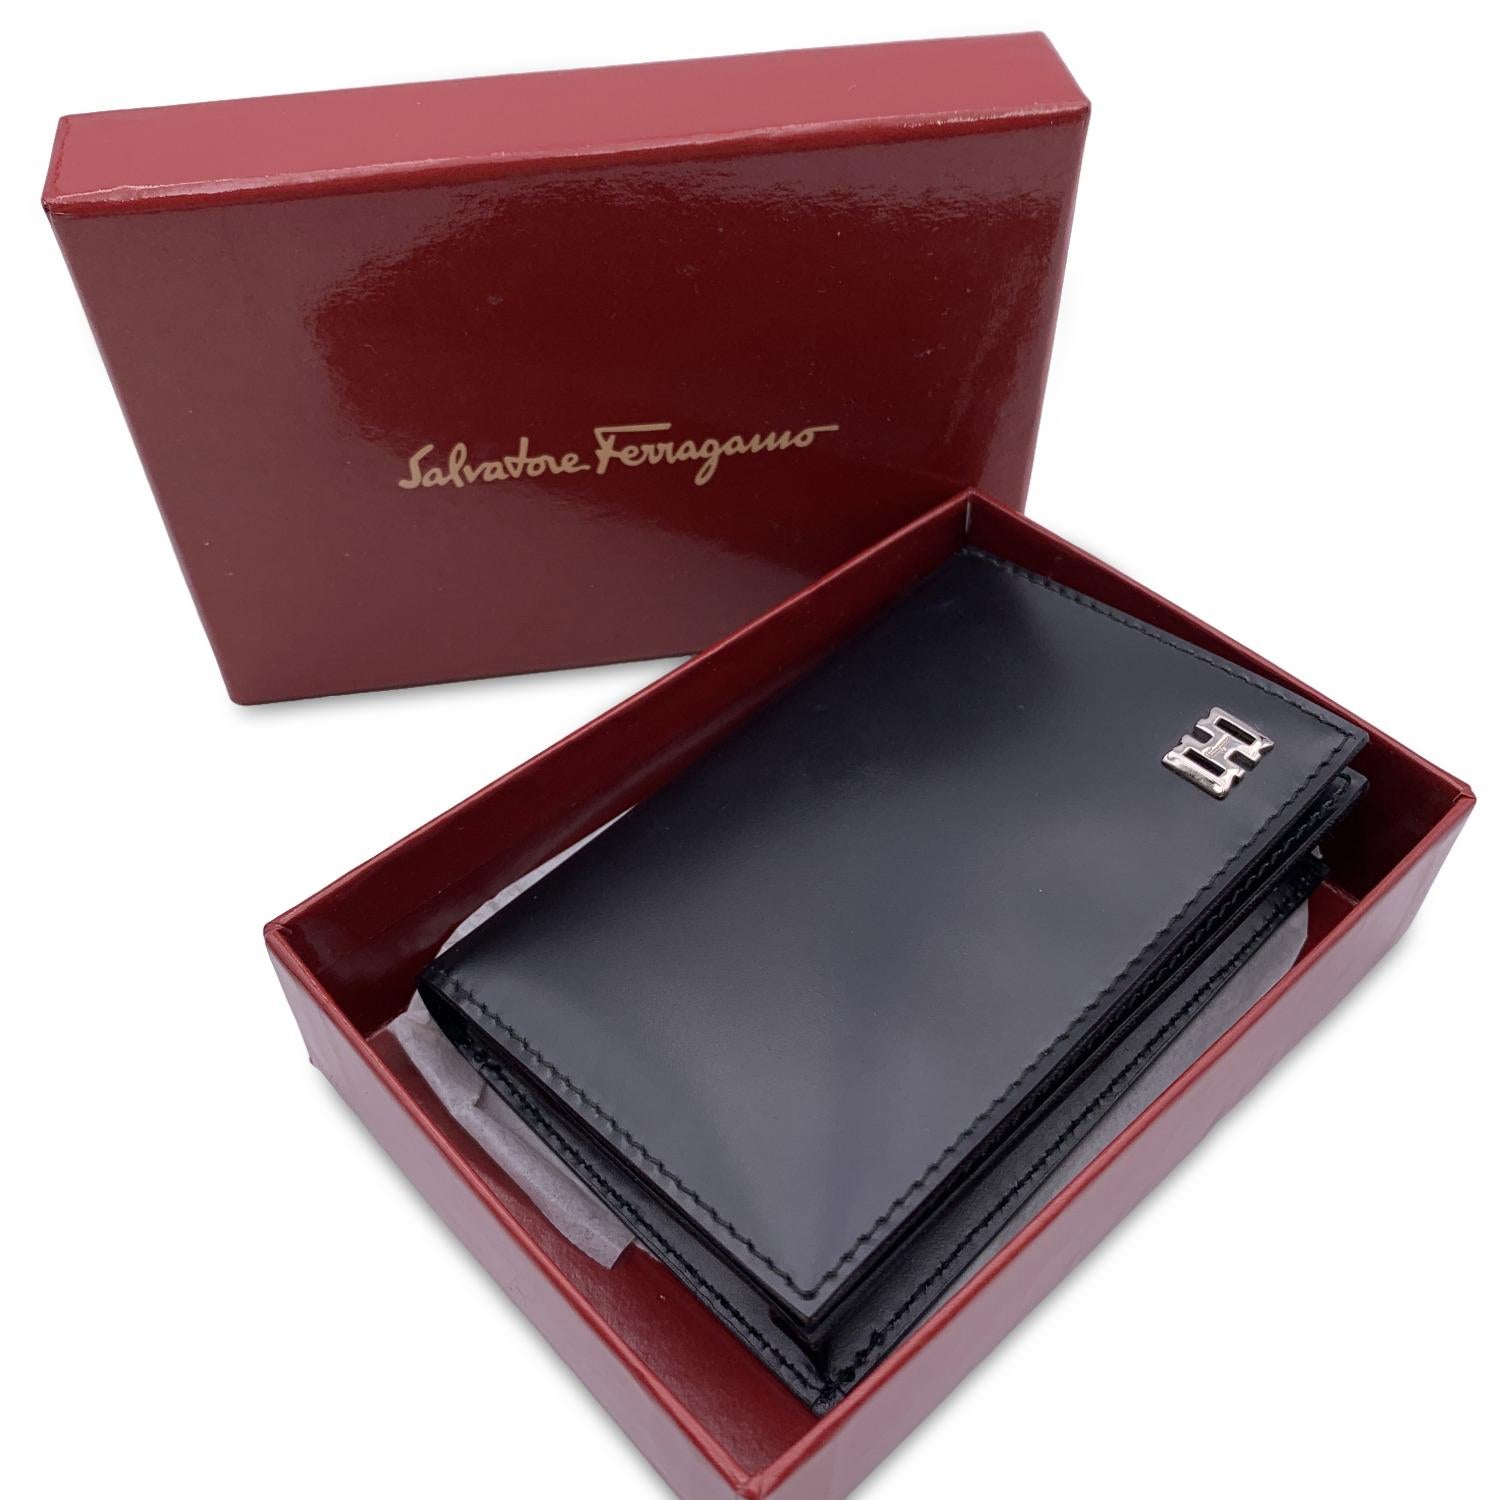 Salvatore Ferragamo black leather card case with keyring. Silver metal hardware. Button closure. Inside it has 5 open pockets and 1 zip coin section. 'Salvatore Ferragamo - Made in Italy' embossed inside.

Details

MATERIAL: Leather

COLOR: